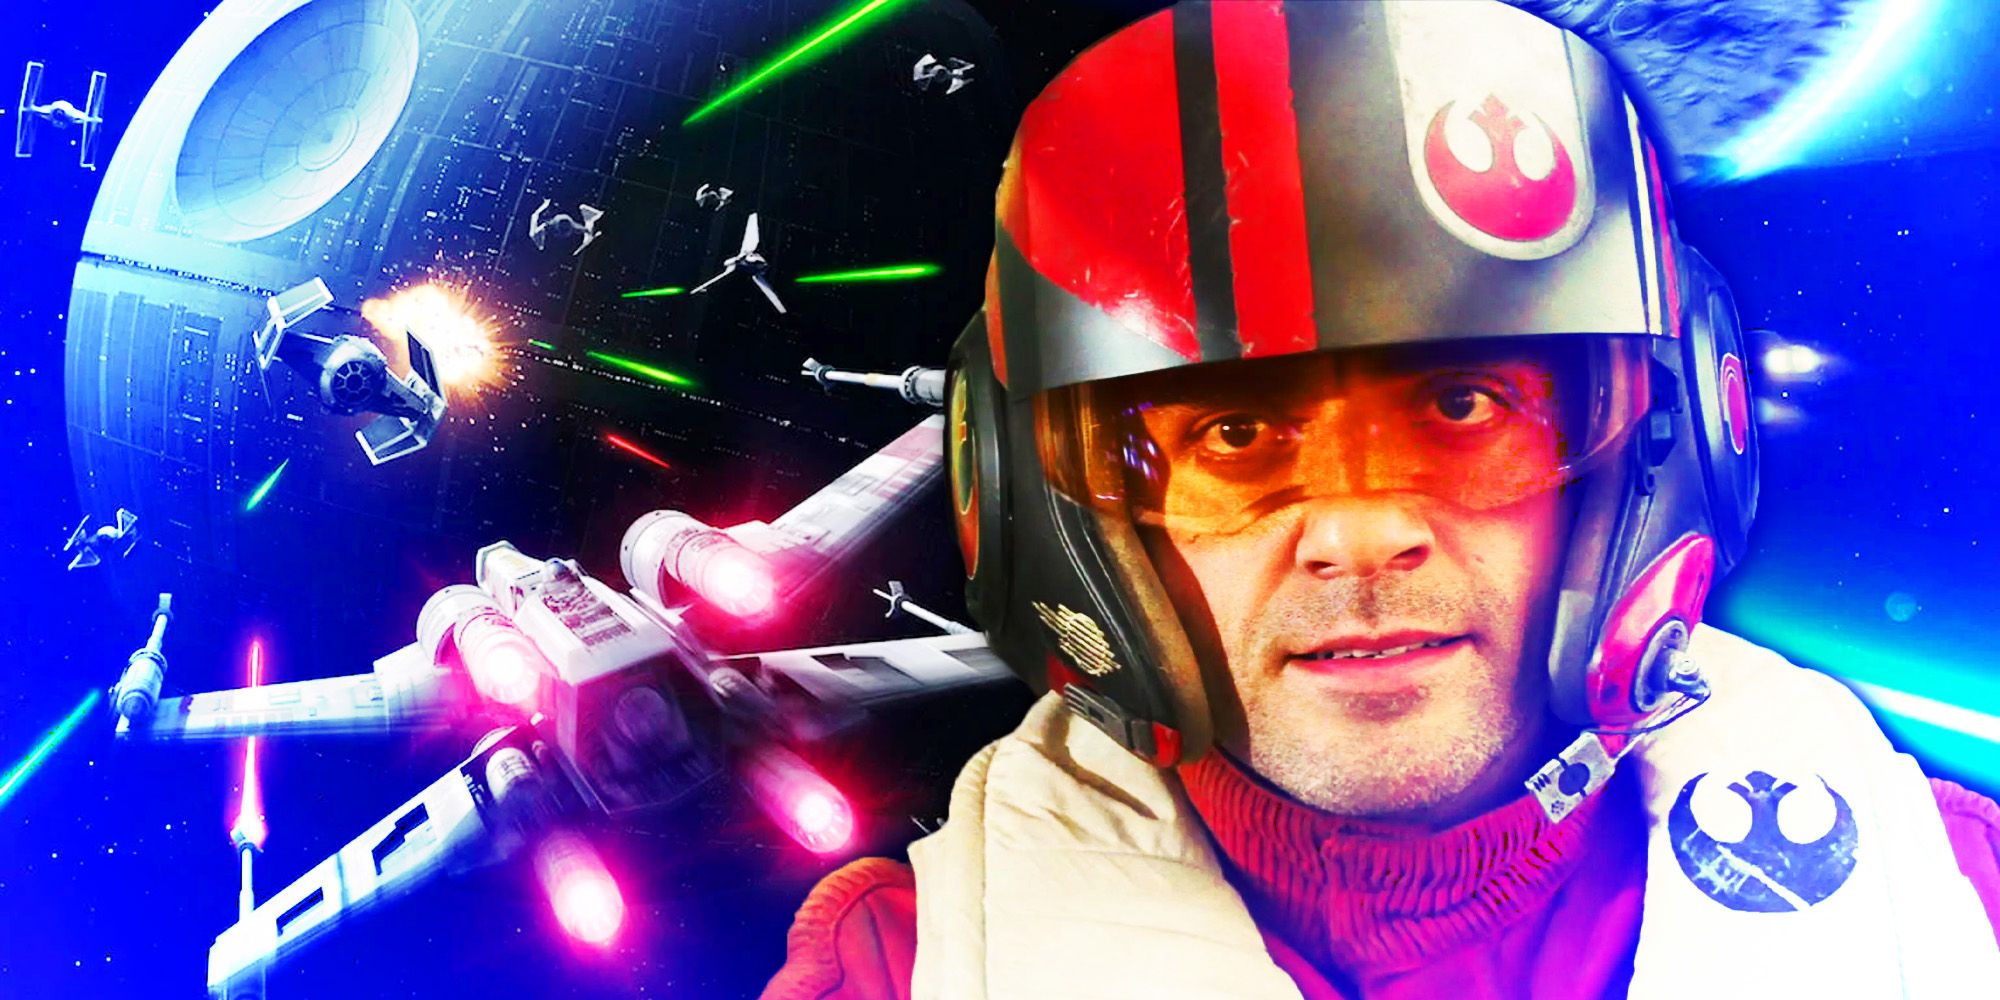 Oscar Isaac from Star Wars The Last Jedi and an X-Wing in aerial combat with Tie Fighters